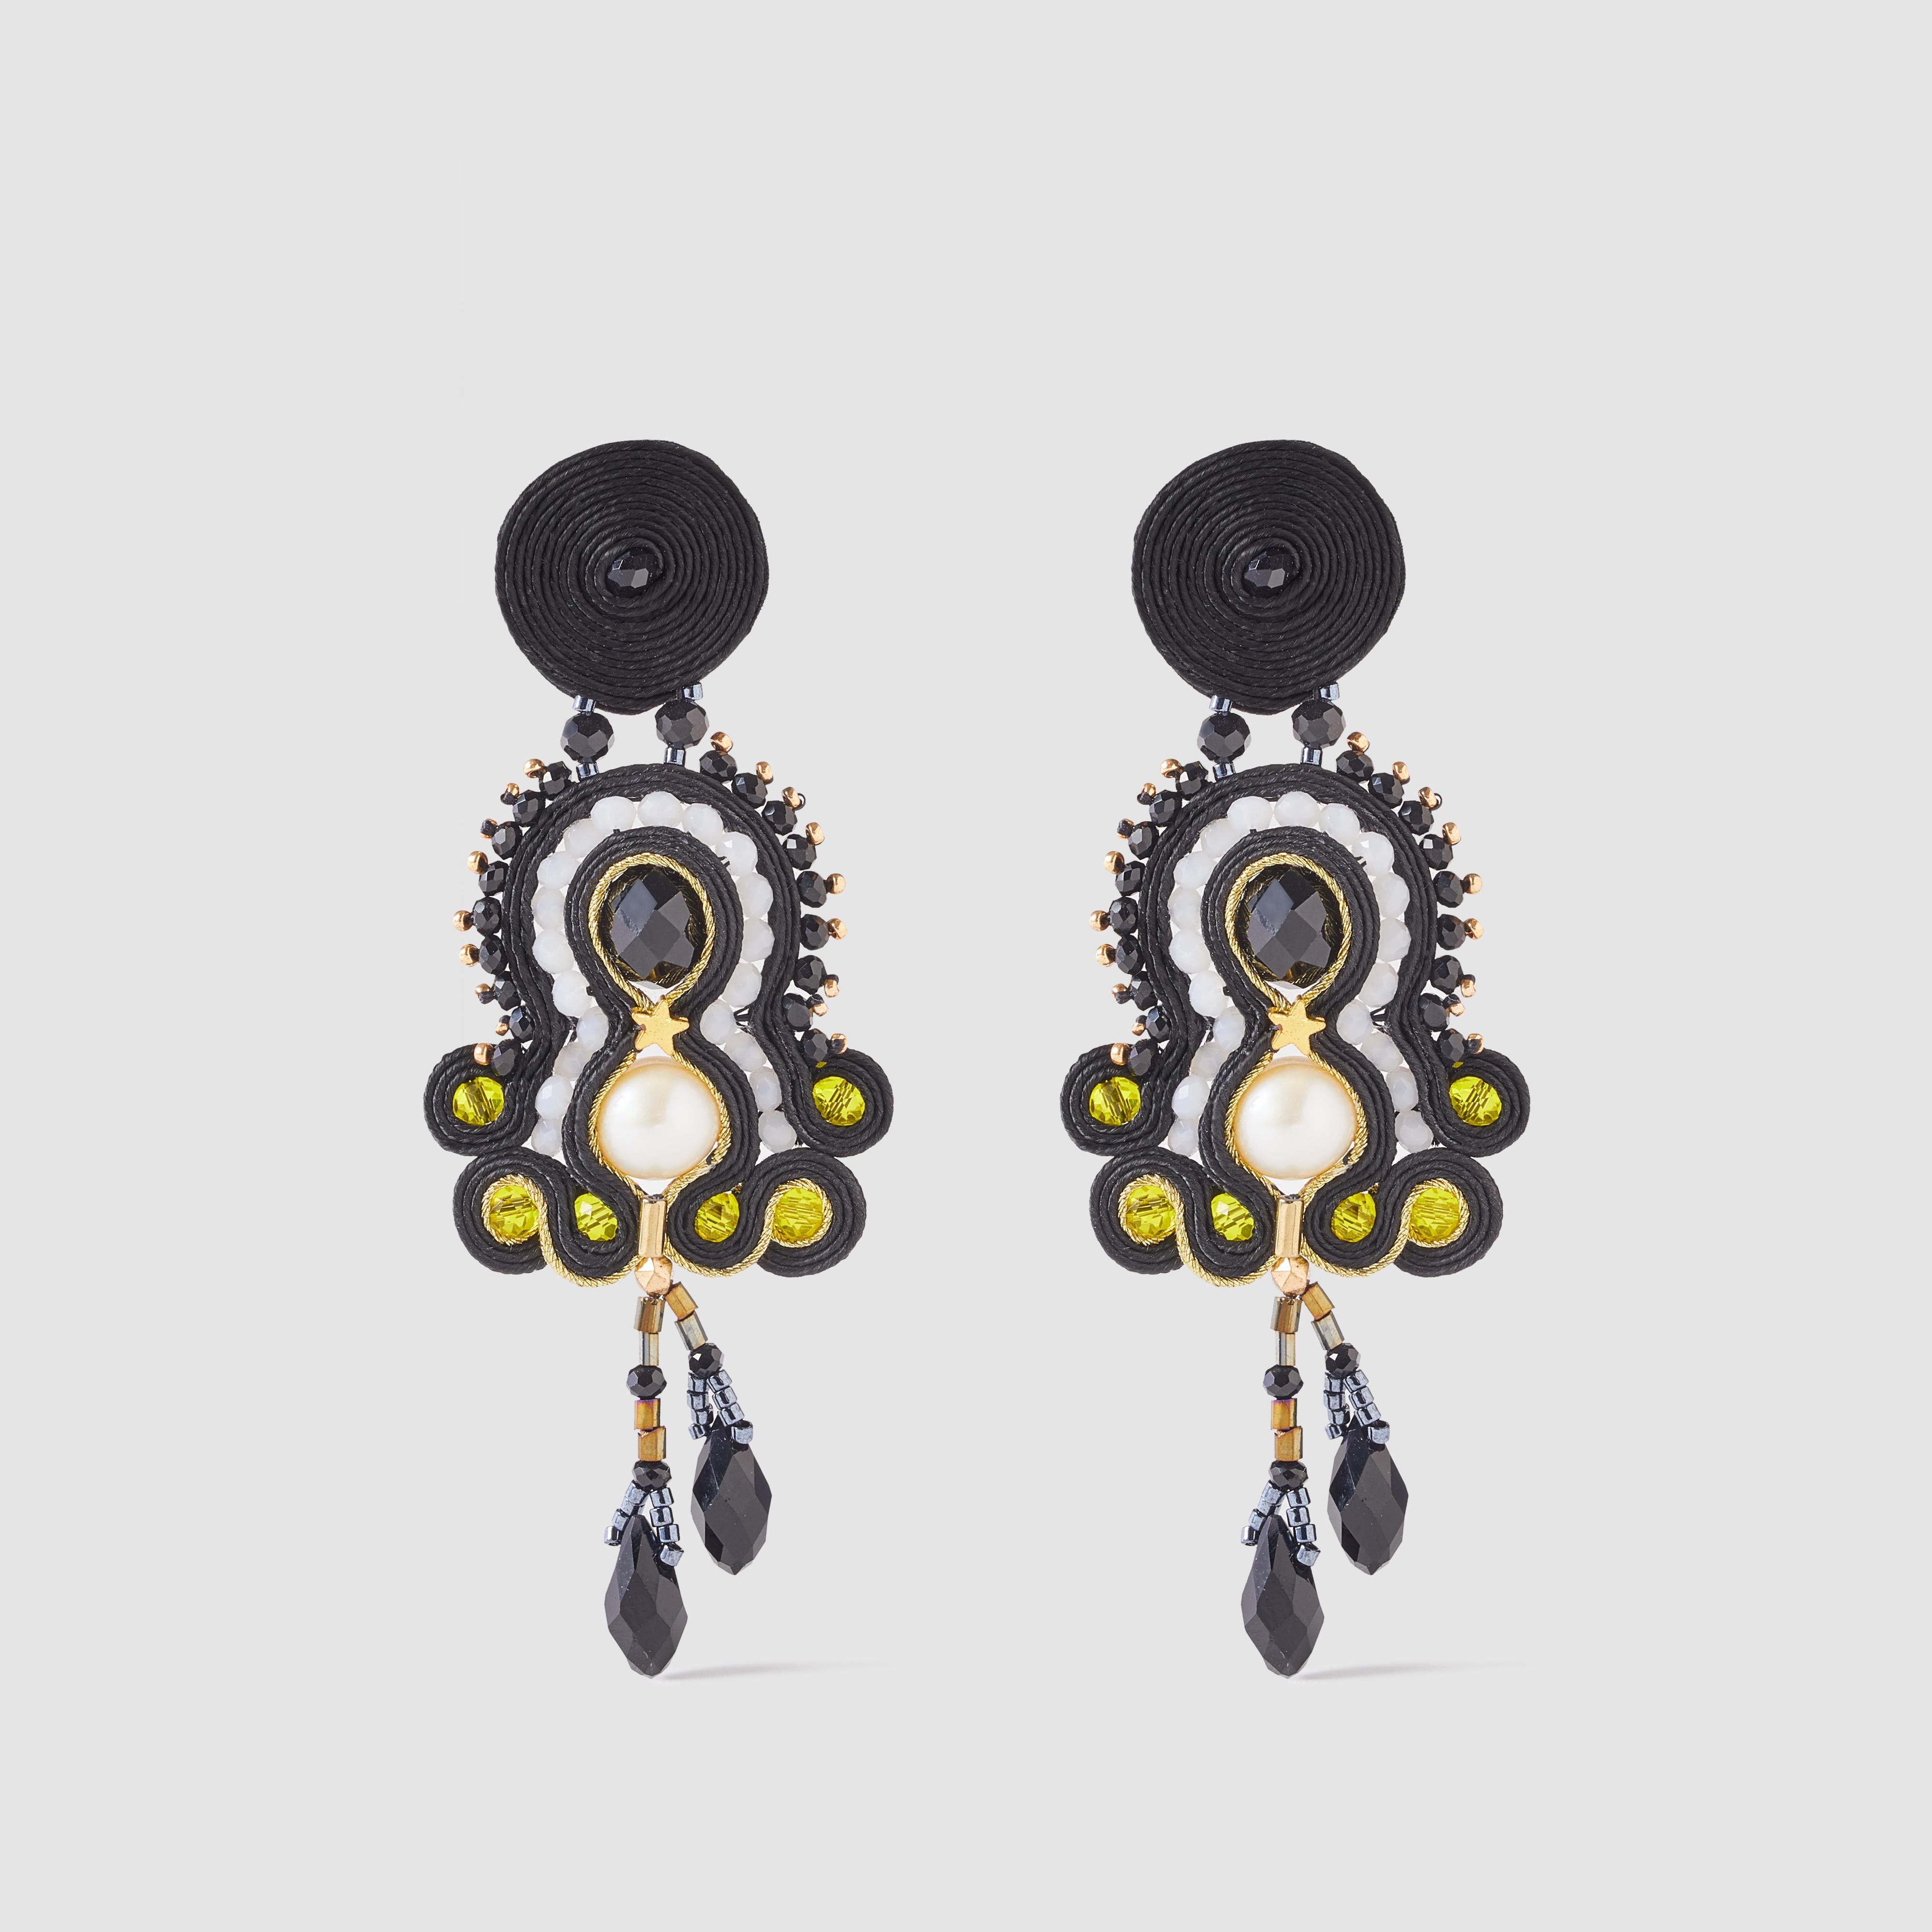 Musula Personalissima Nicoletta Night Soutache Earrings
Soutache earrings made with silk rayon and crystal beads & silver closure

Hand-sewn earrings.
Rayon yarn 2mm.
River pearls, hematite and glass beads.
Silver nut XL
Length 9cm 
Ultralight,